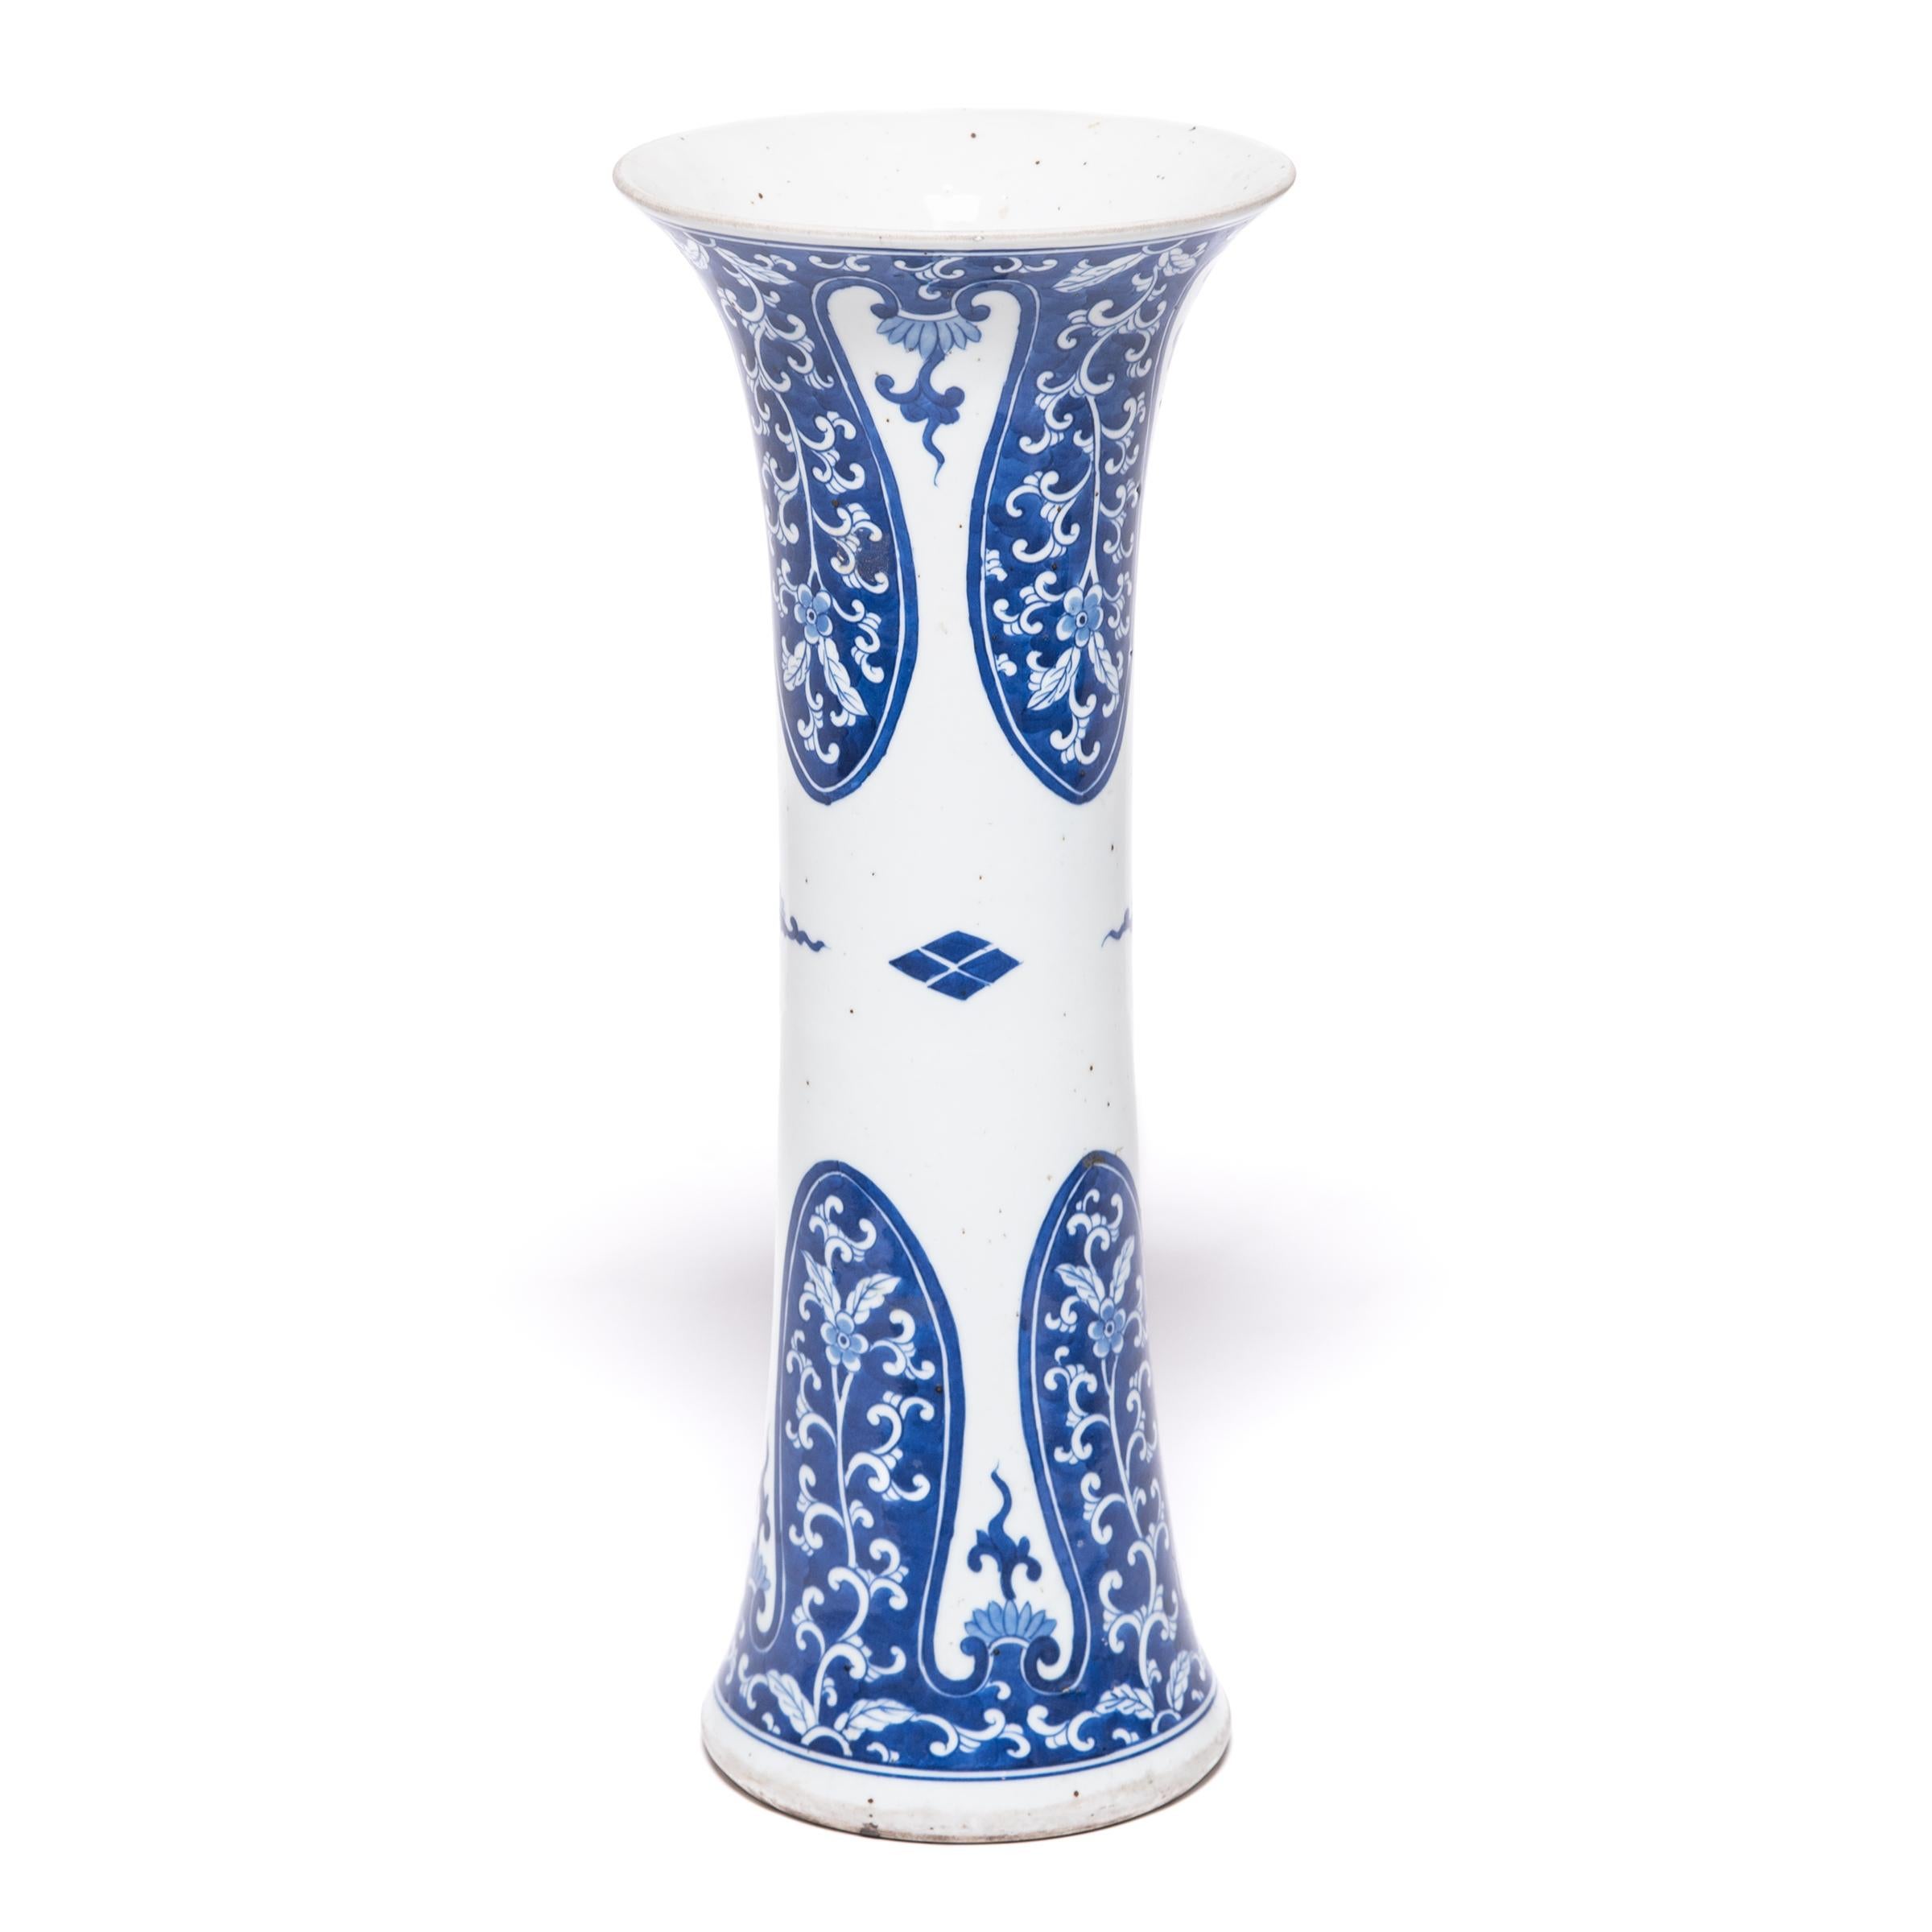 Originally cast in bronze, the gu vase form dates back nearly three thousand years. Characterized by a slender body and flared mouth, gu vases were traditionally used for drinking wine or presenting ritual offerings. Crafted of porcelain, this